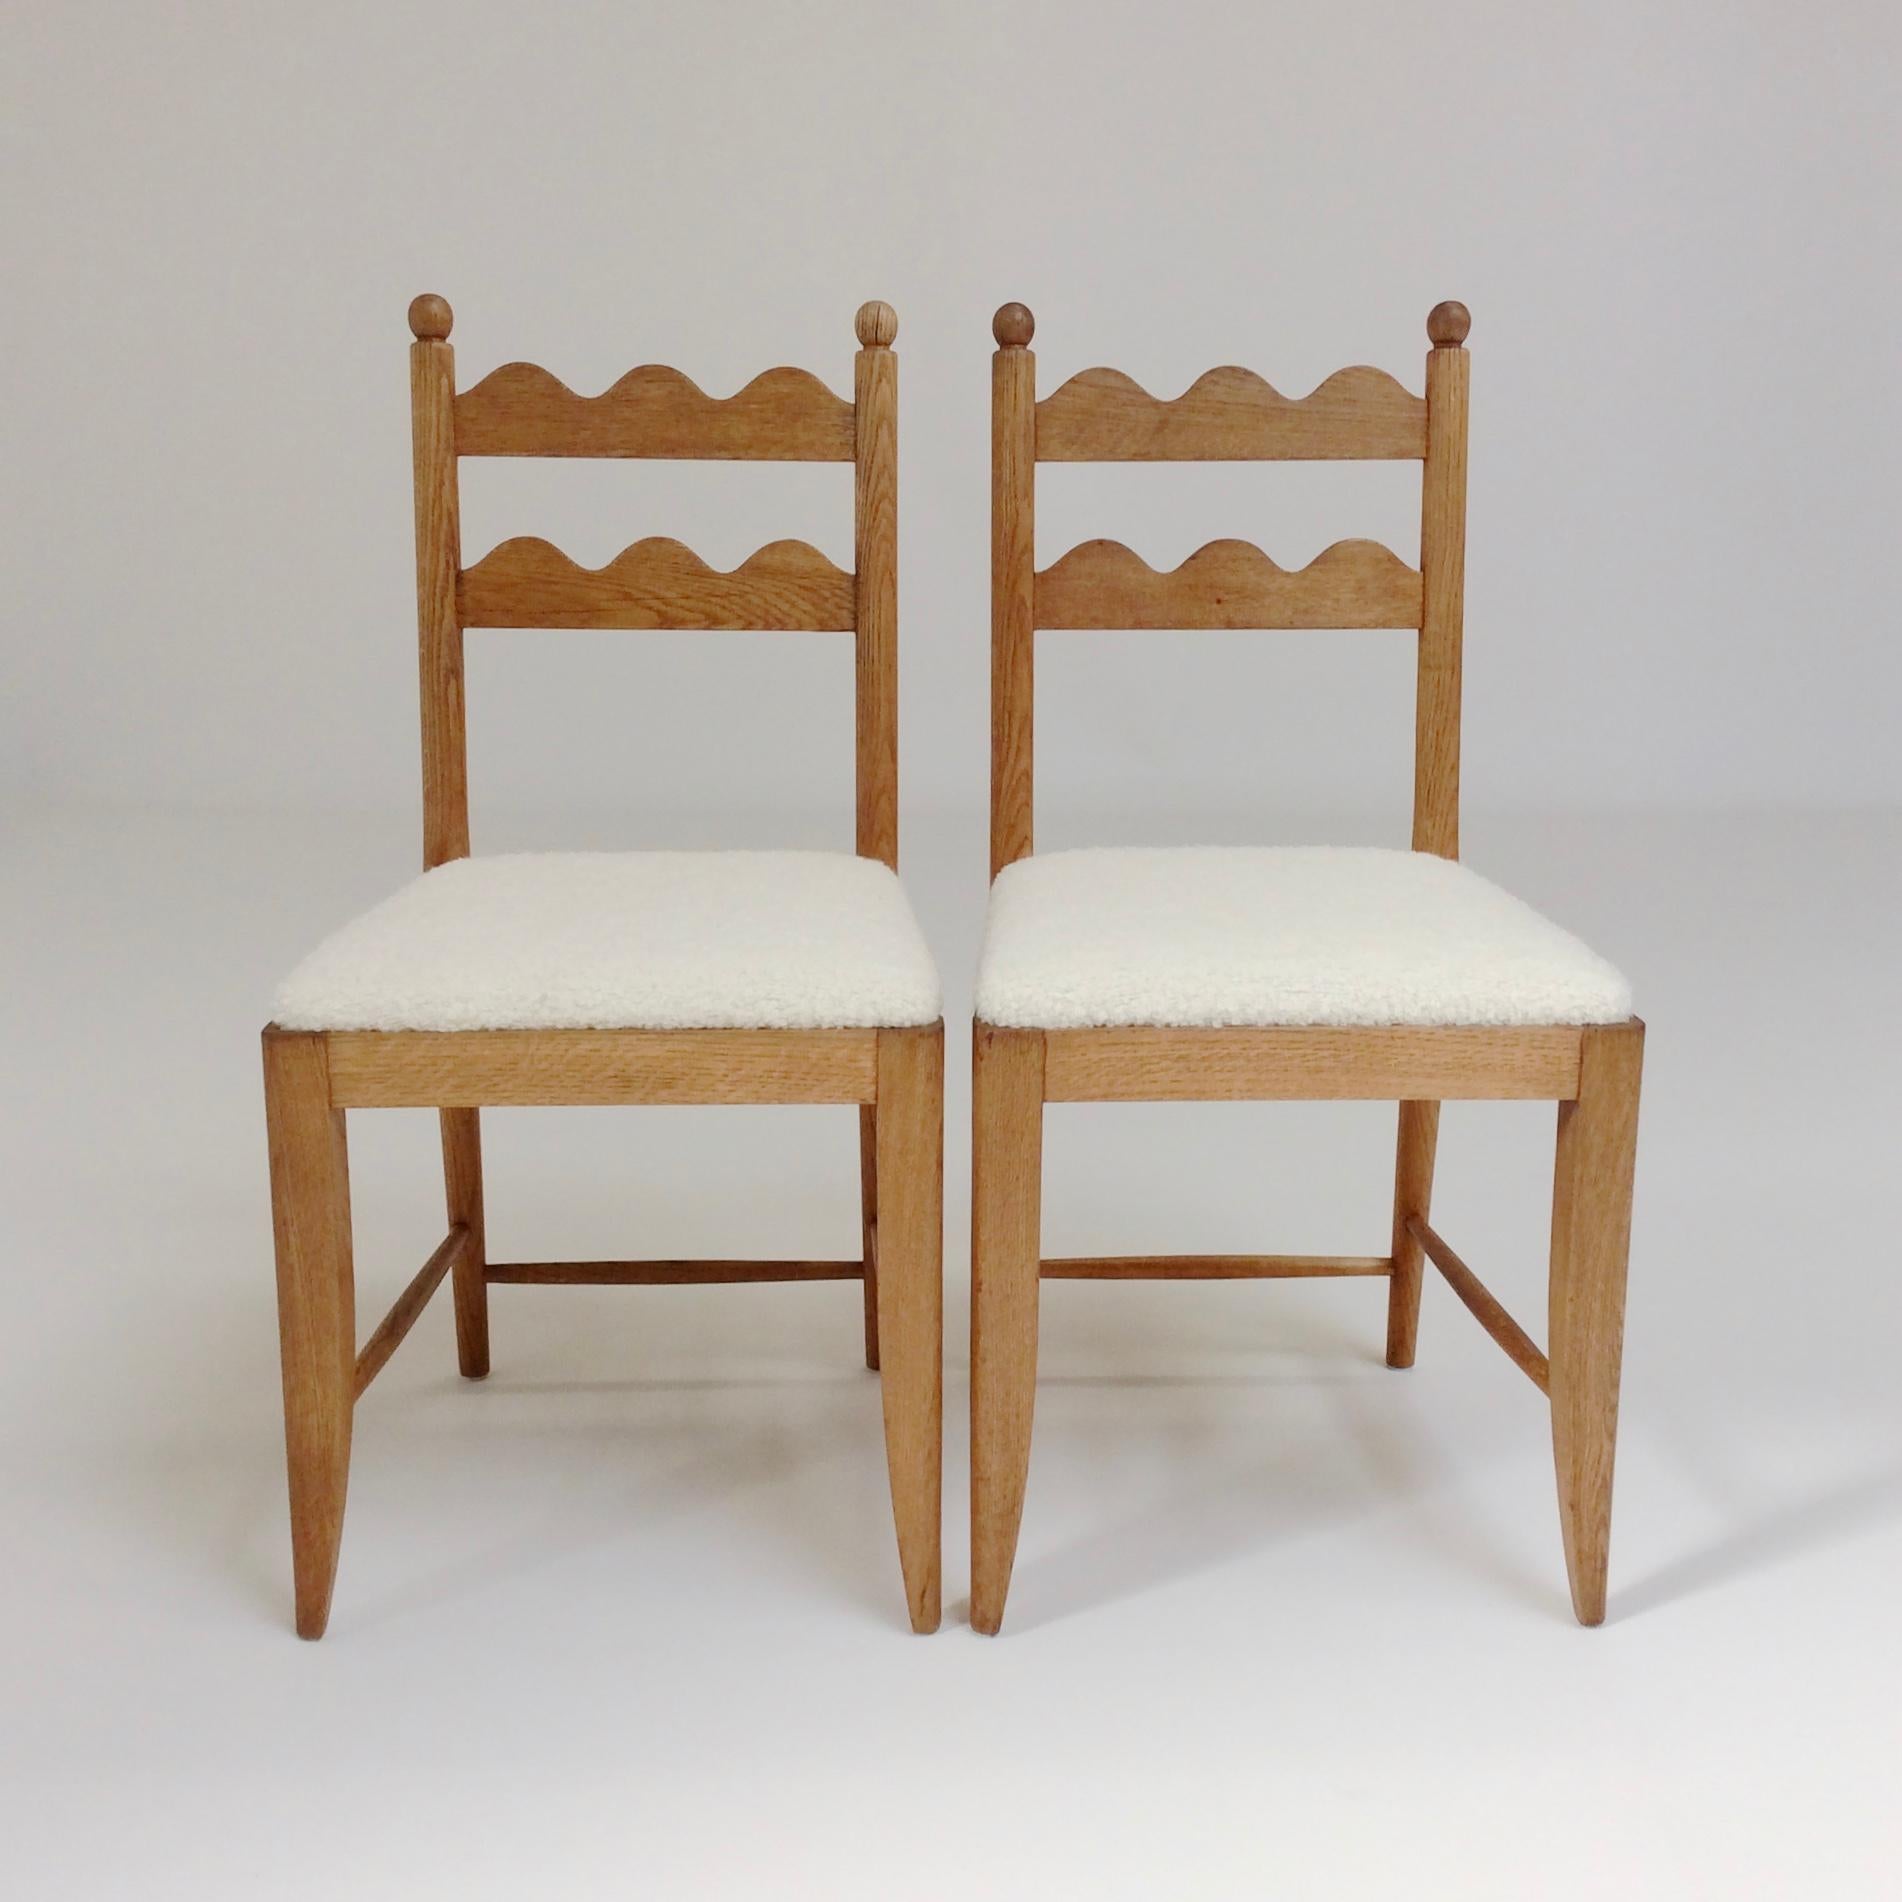 Beautiful and rare pair of Jean Royere attributed chairs, circa 1946, France.
Back with two decorative ondulations.
Solid oak, new ivory fabric seat.
Dimensions: 91 cm H, 44 cm W, 46 cm D, seat height 46 cm.
Documentation: similar chairs illustrated